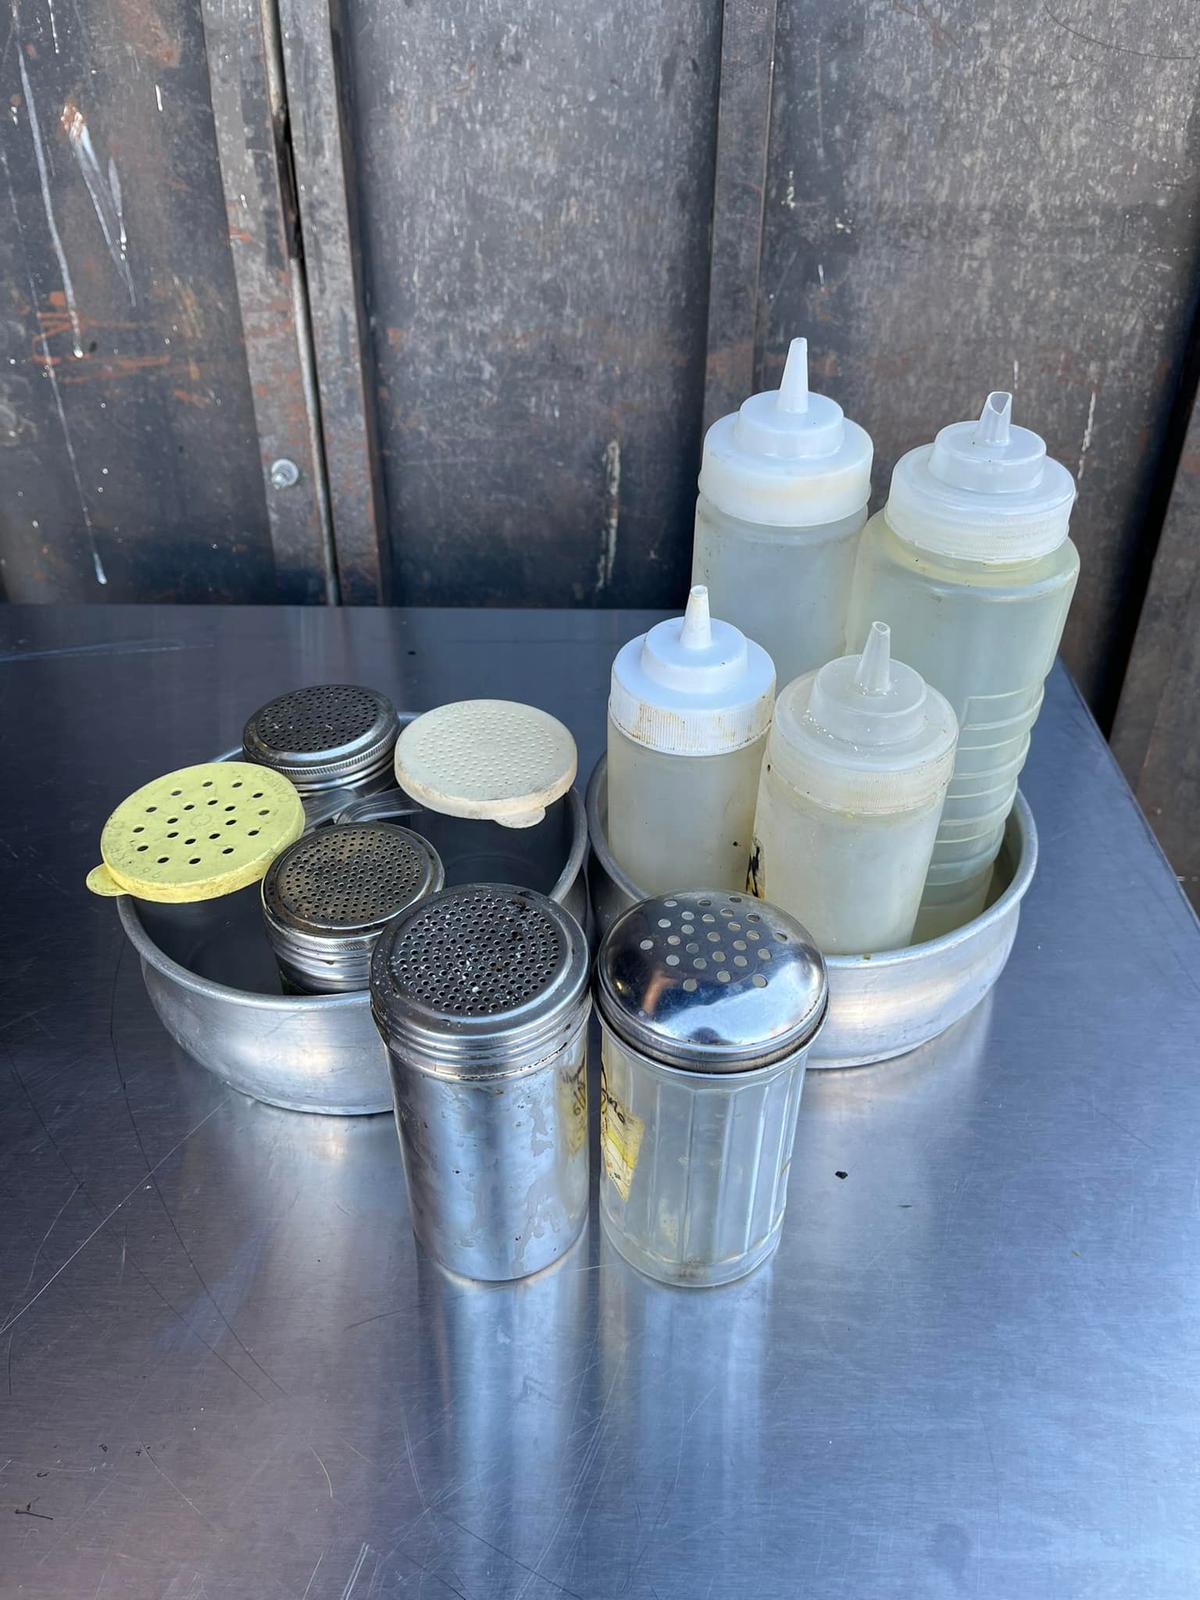 Lot of Squeeze Bottles & Shakers